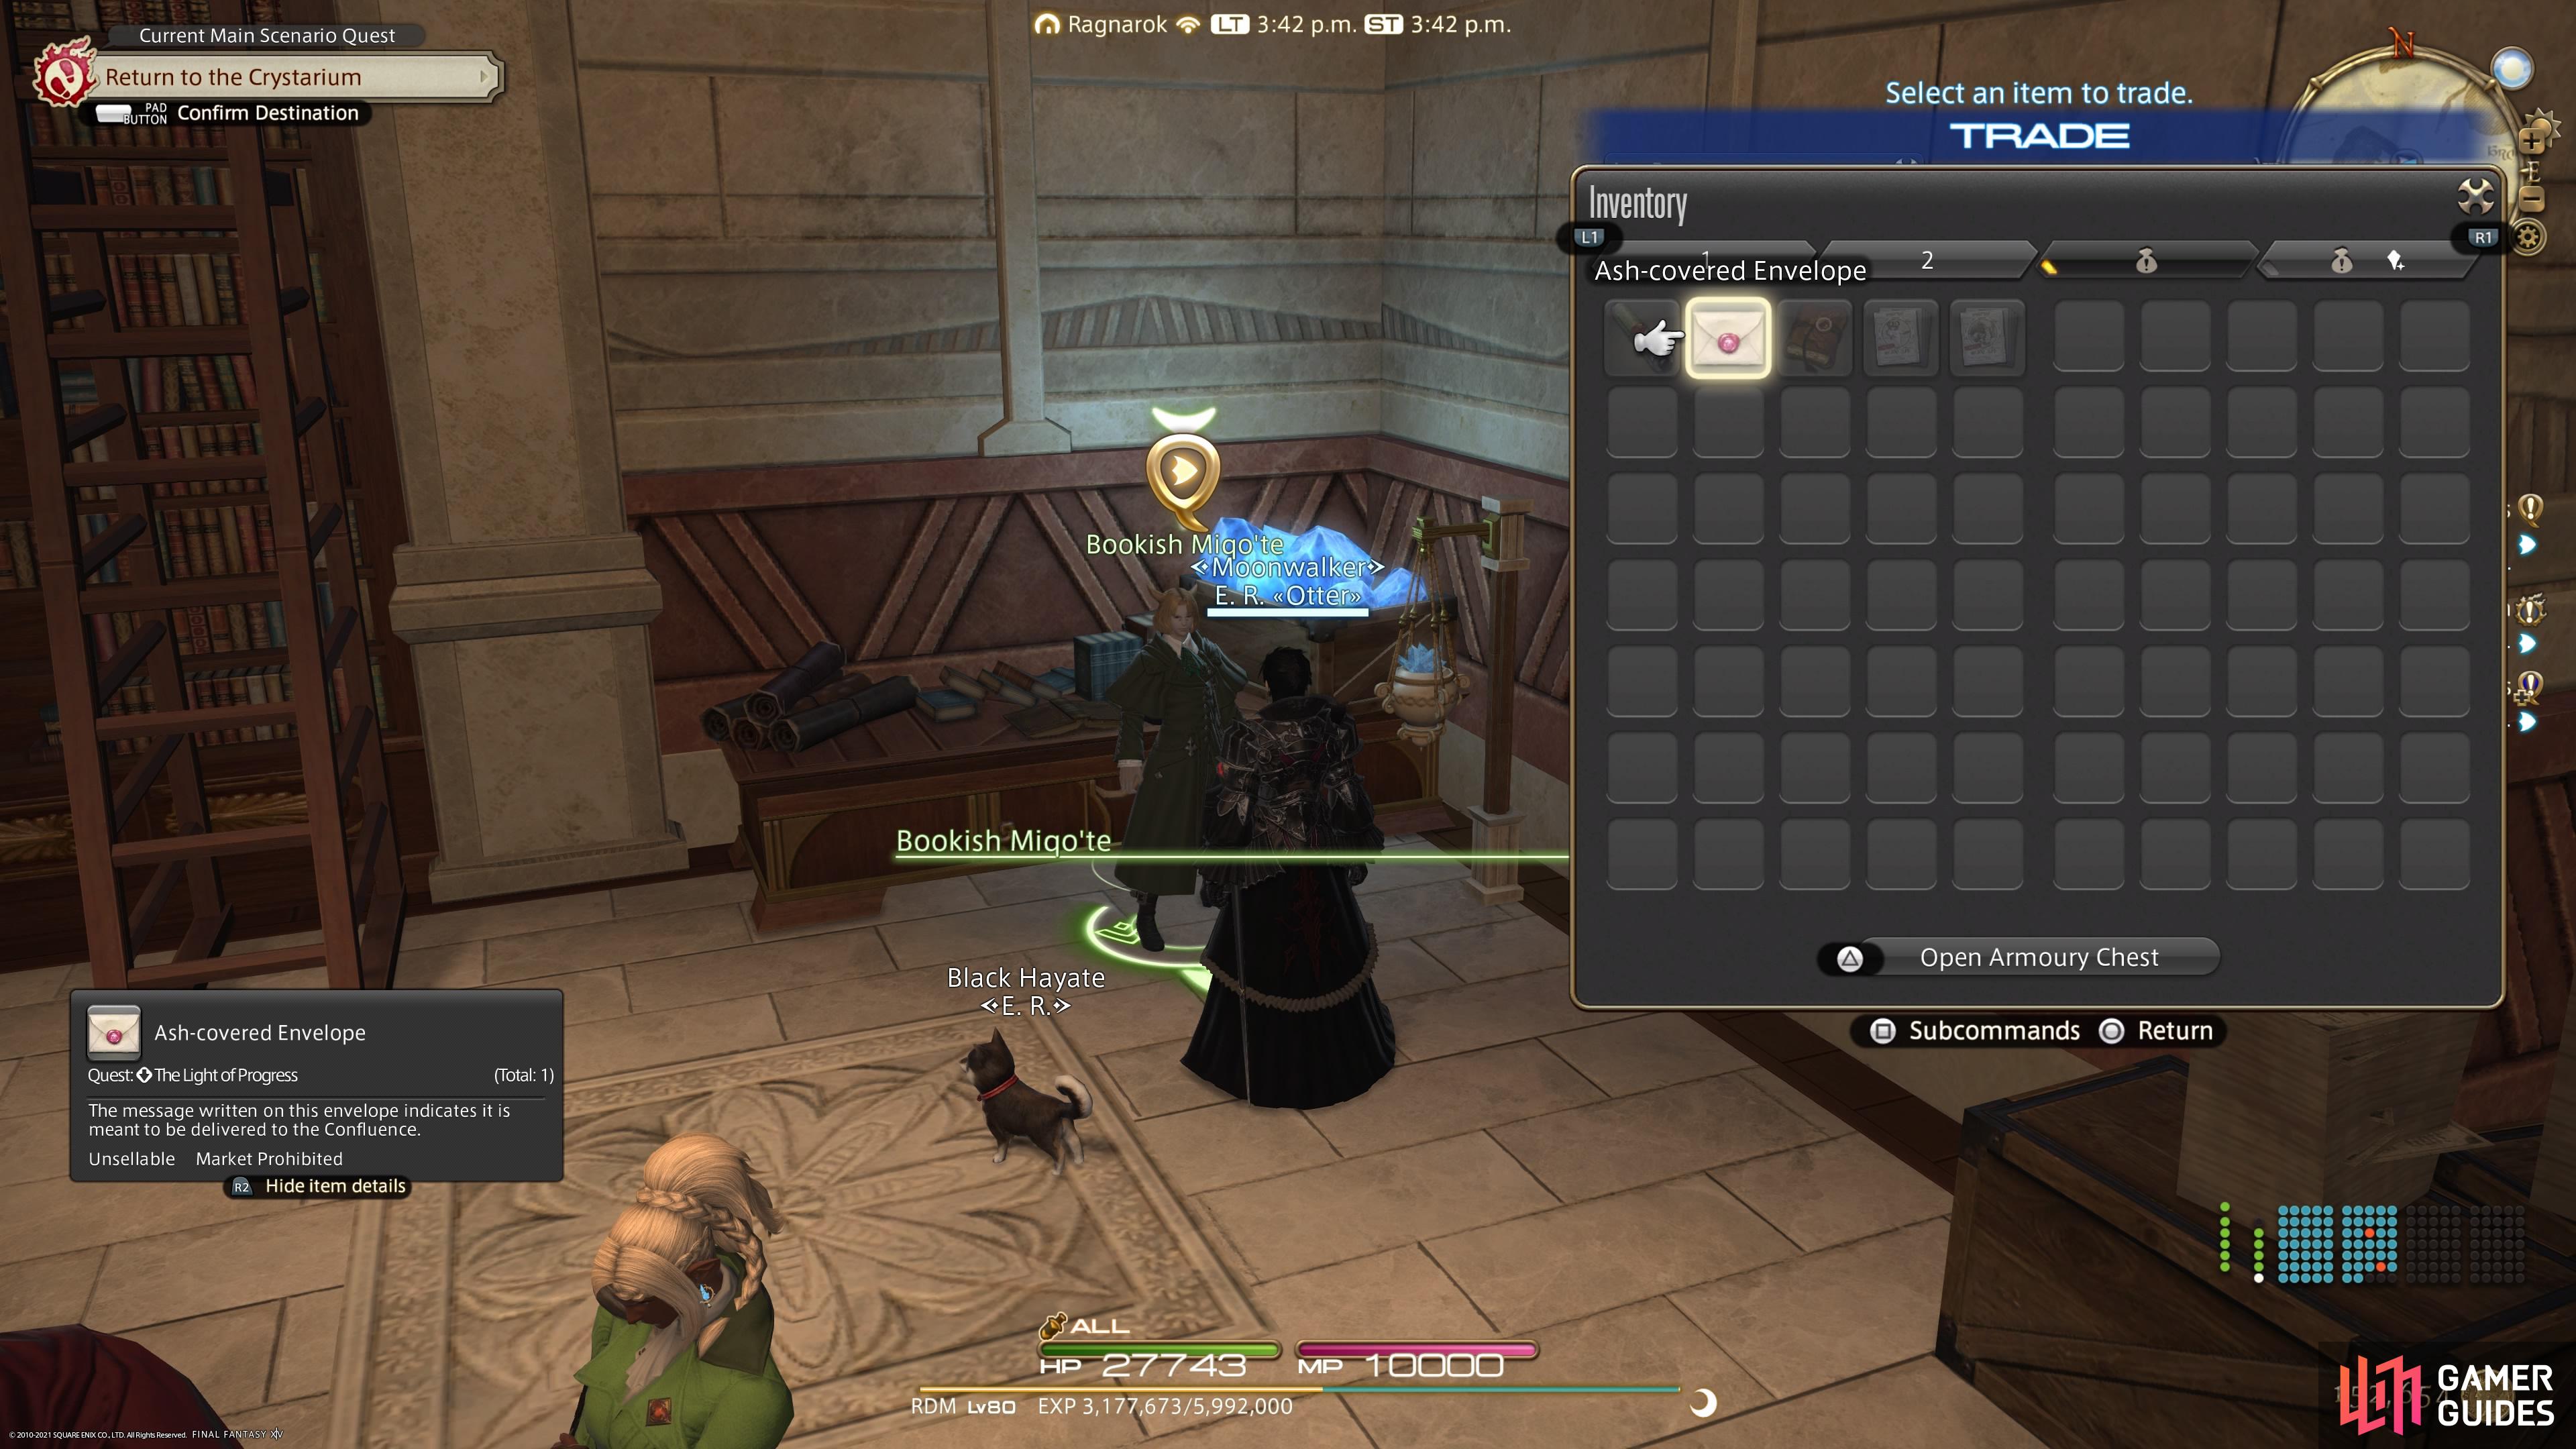 Give the envelope to the Bookish Miqo'te in The Confluence. 